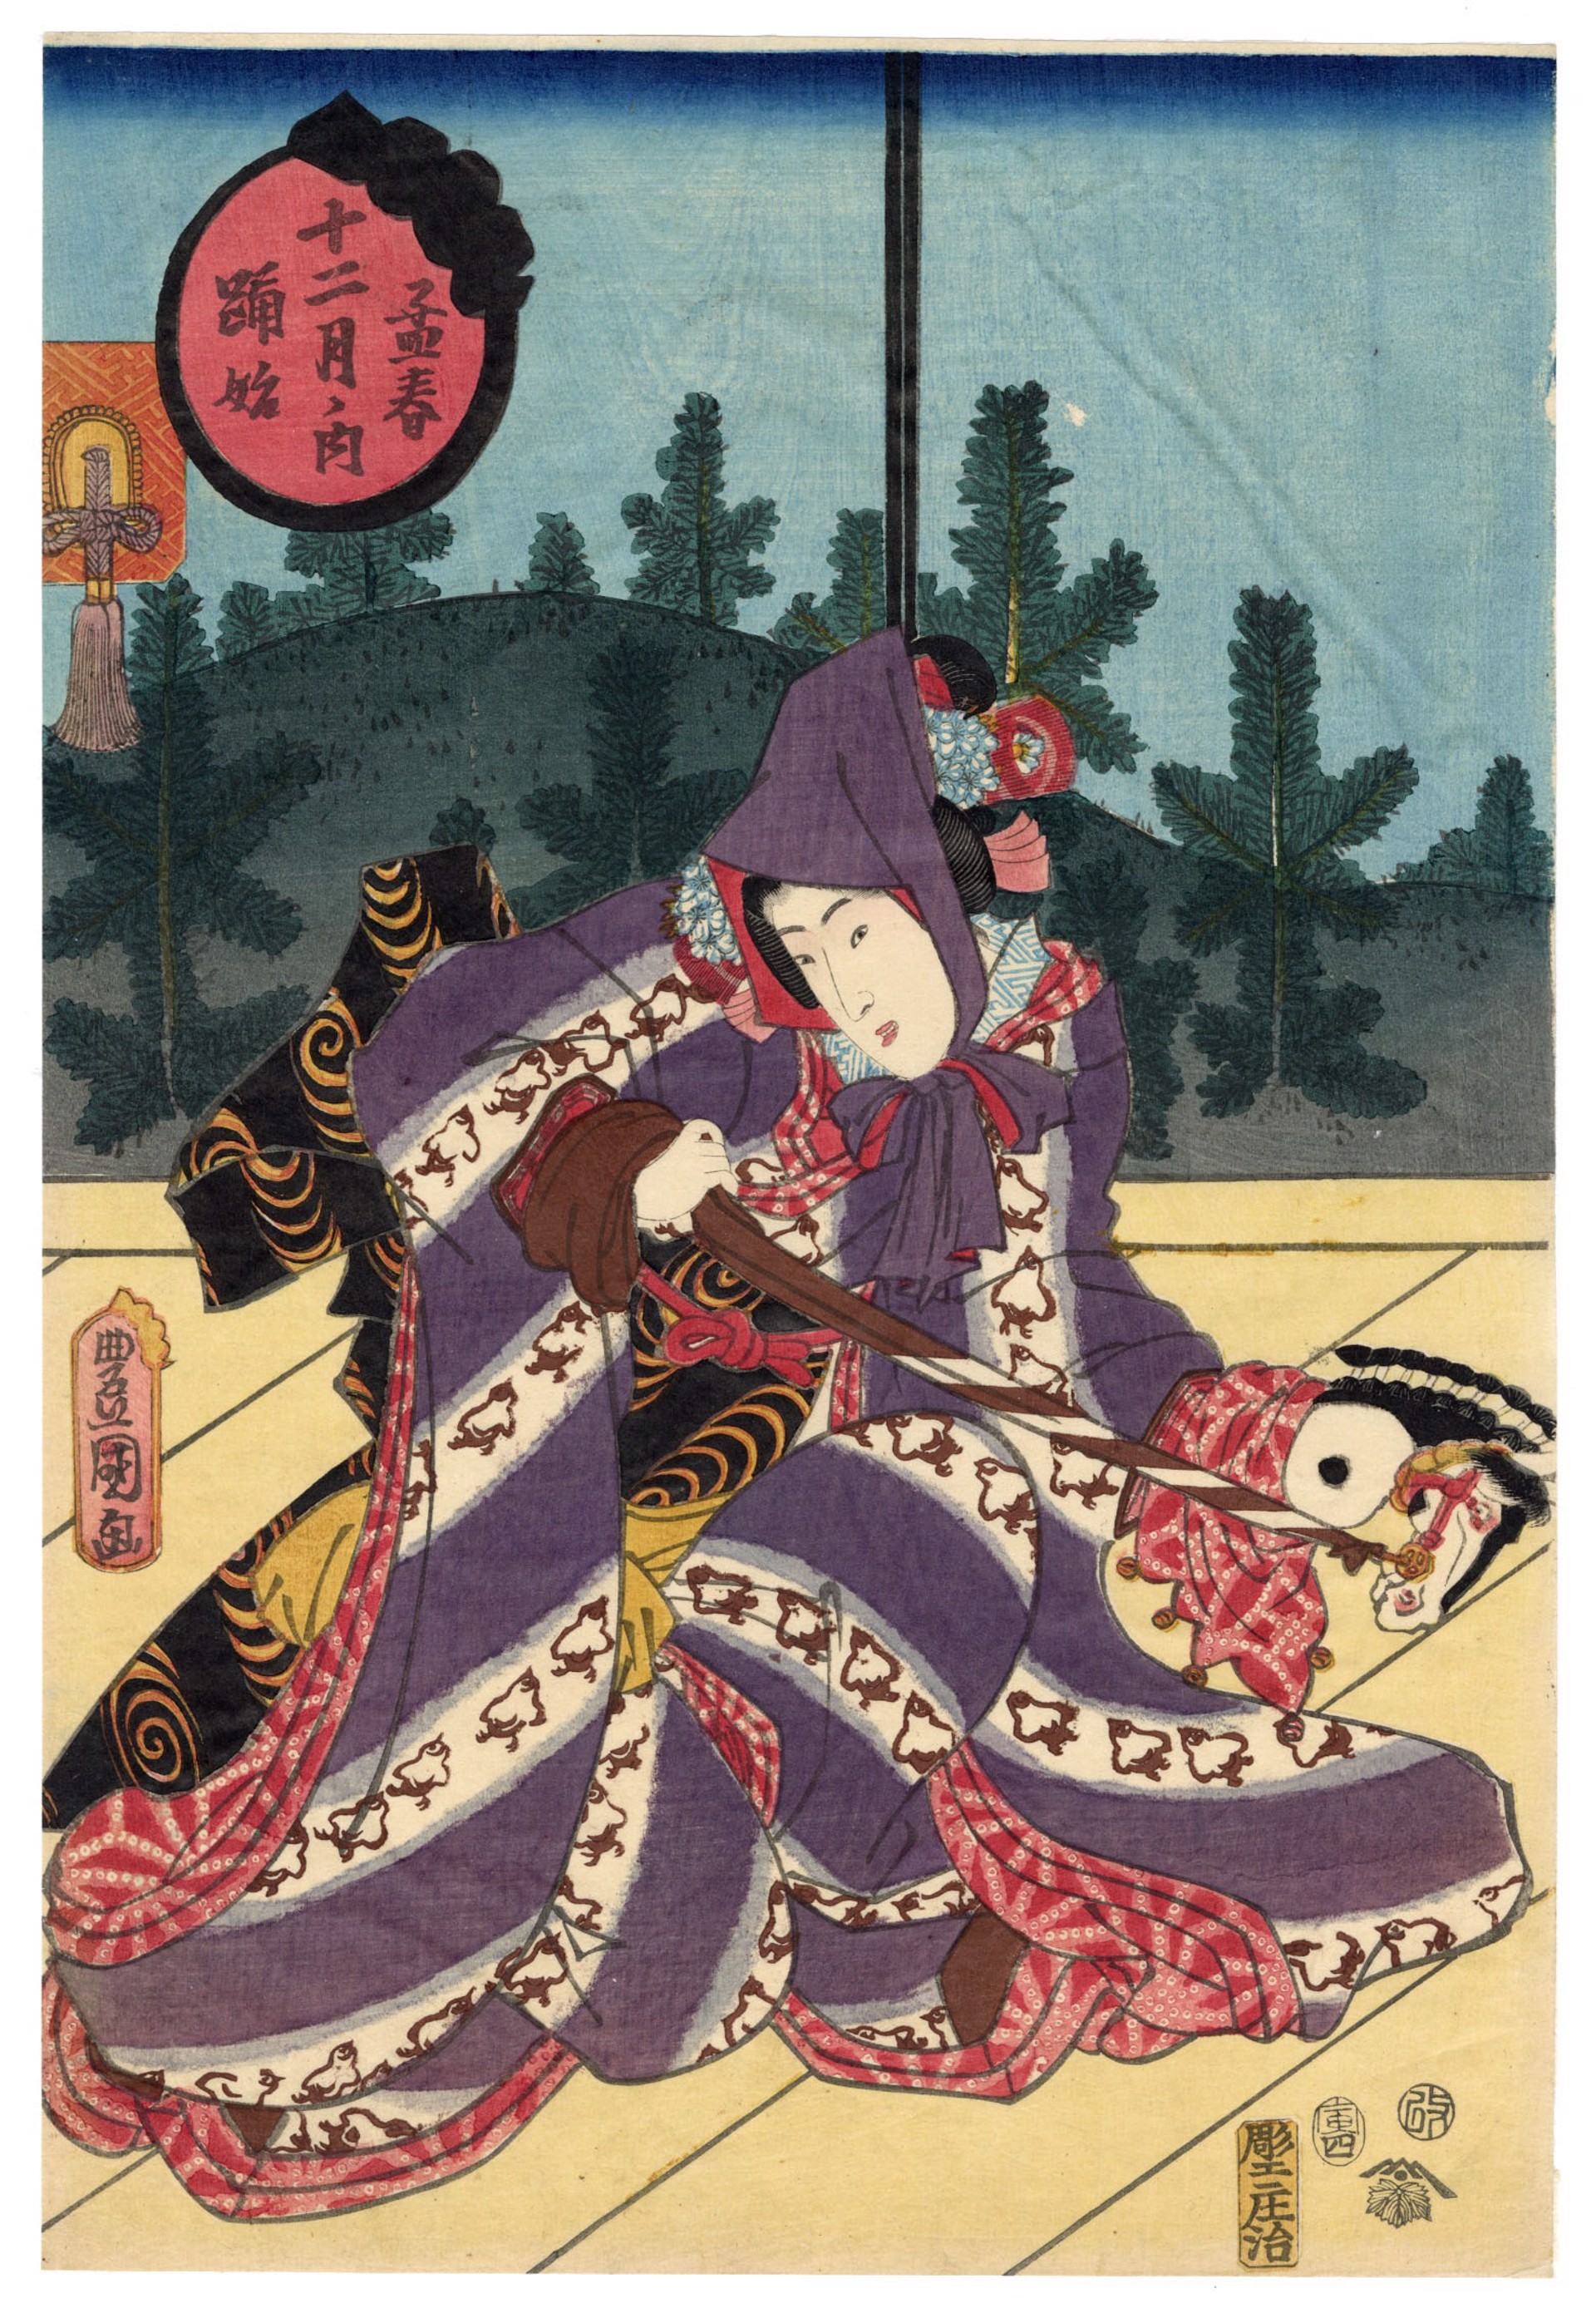 First  Month - January, Mengharu Dance Begins The 12 Months by Kunisada